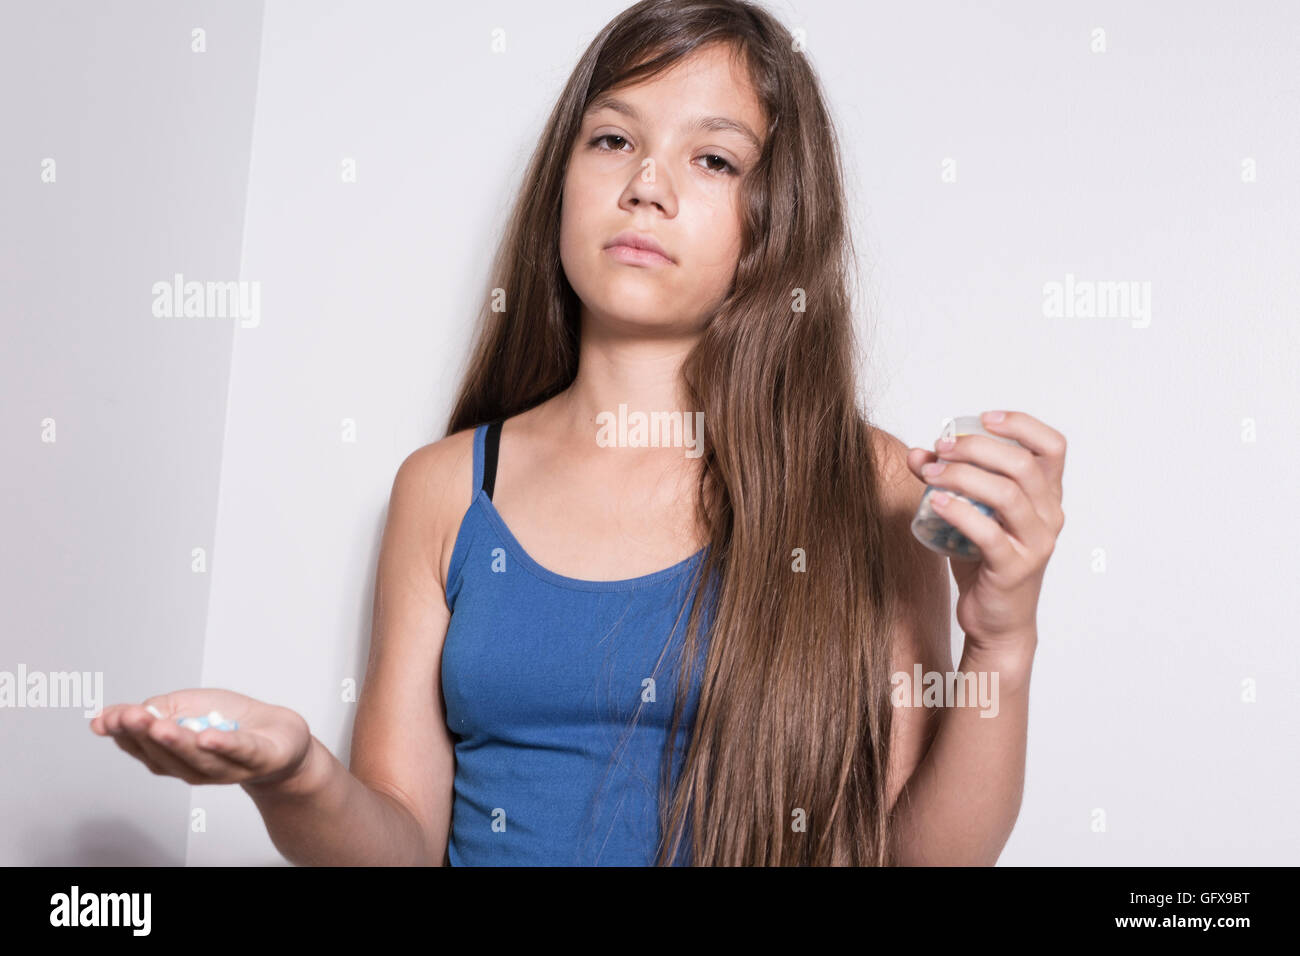 Depressed teenager with pills Stock Photo